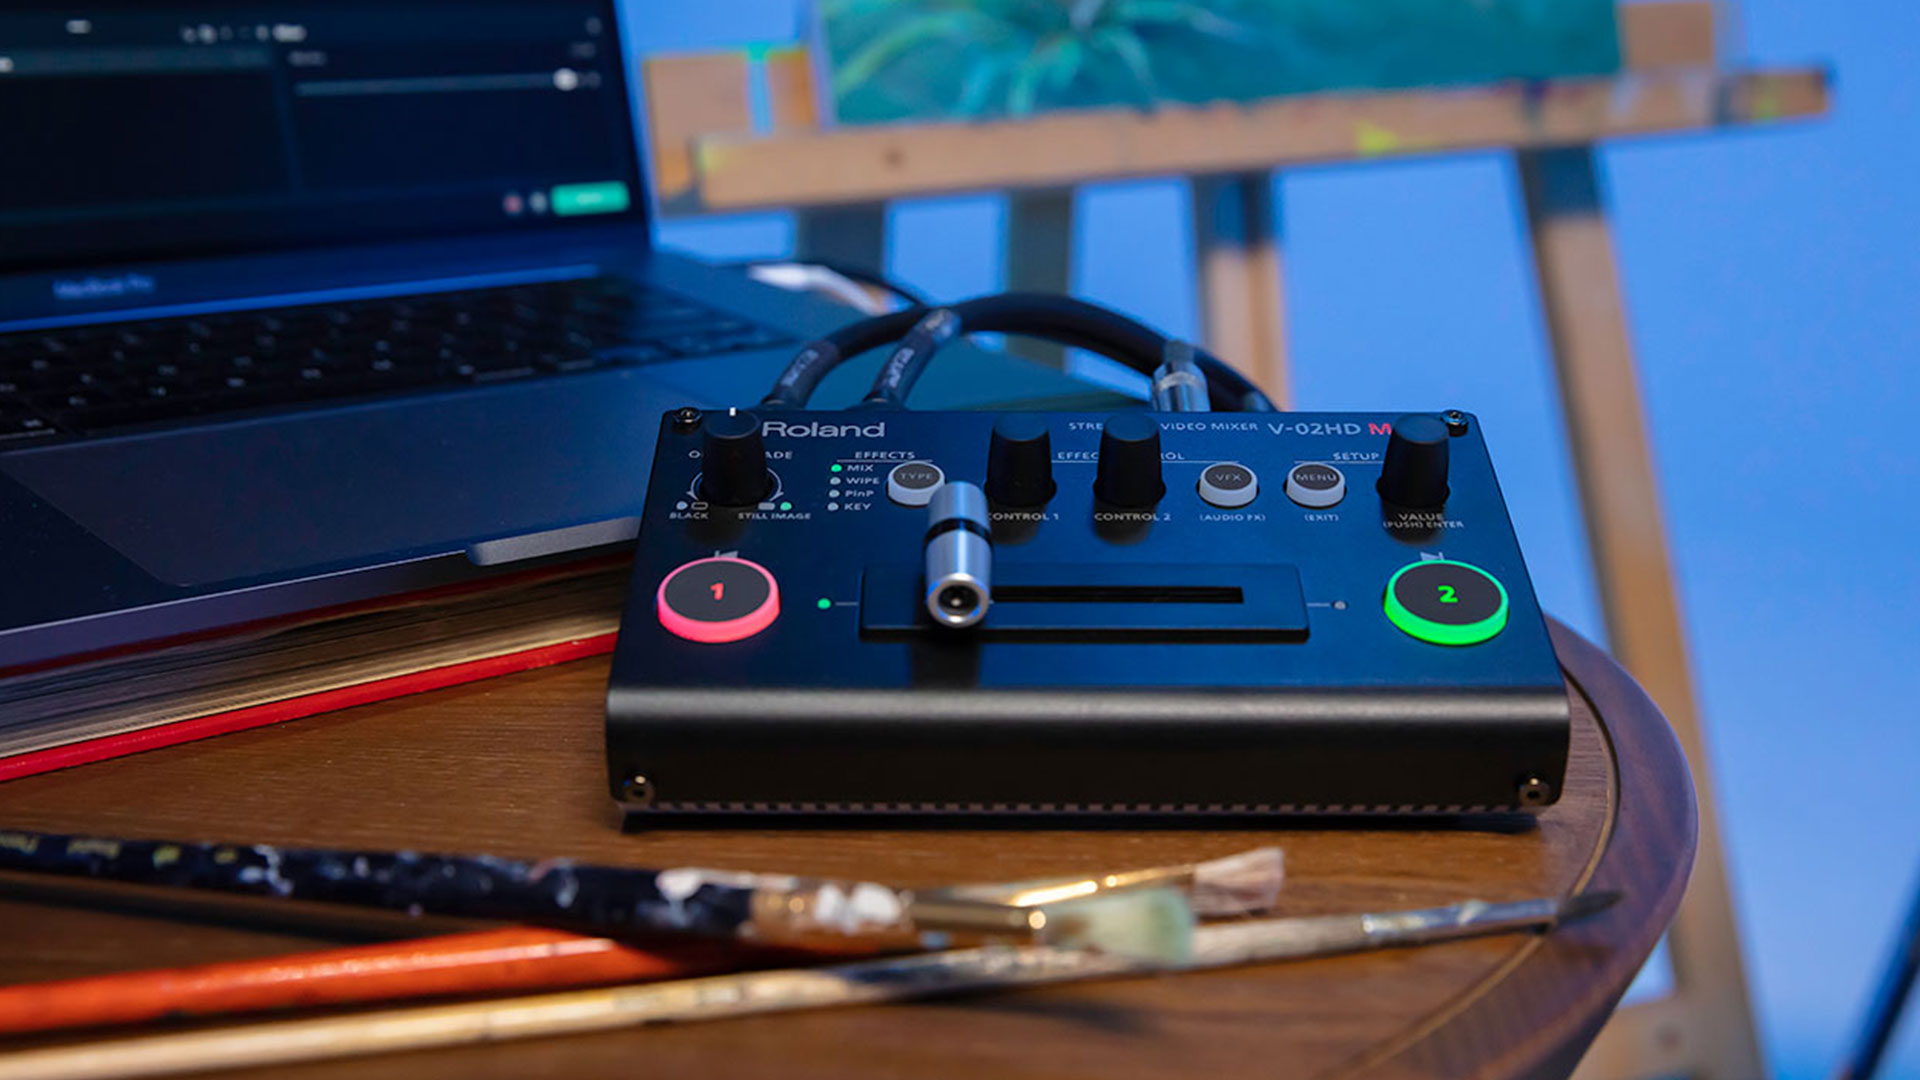 Roland V-02HD MK II Streaming Video Mixer Introduced | CineD